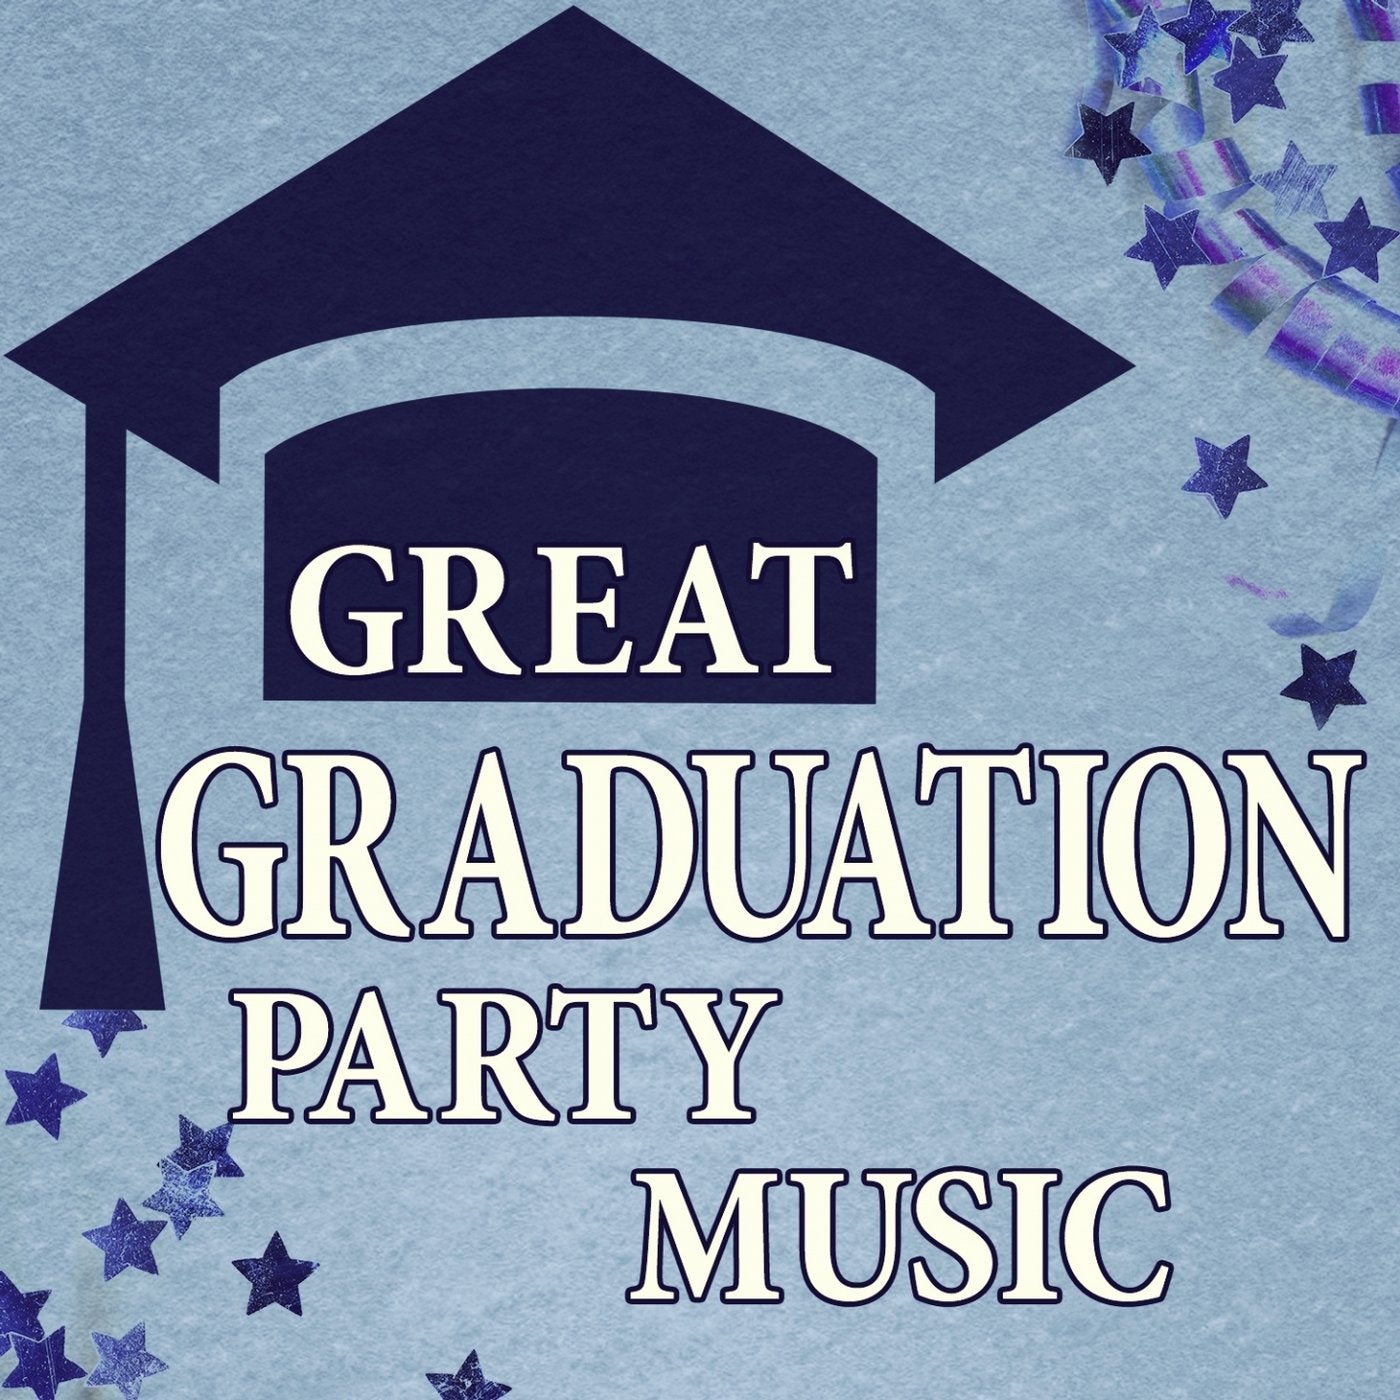 Great Graduation Party Music